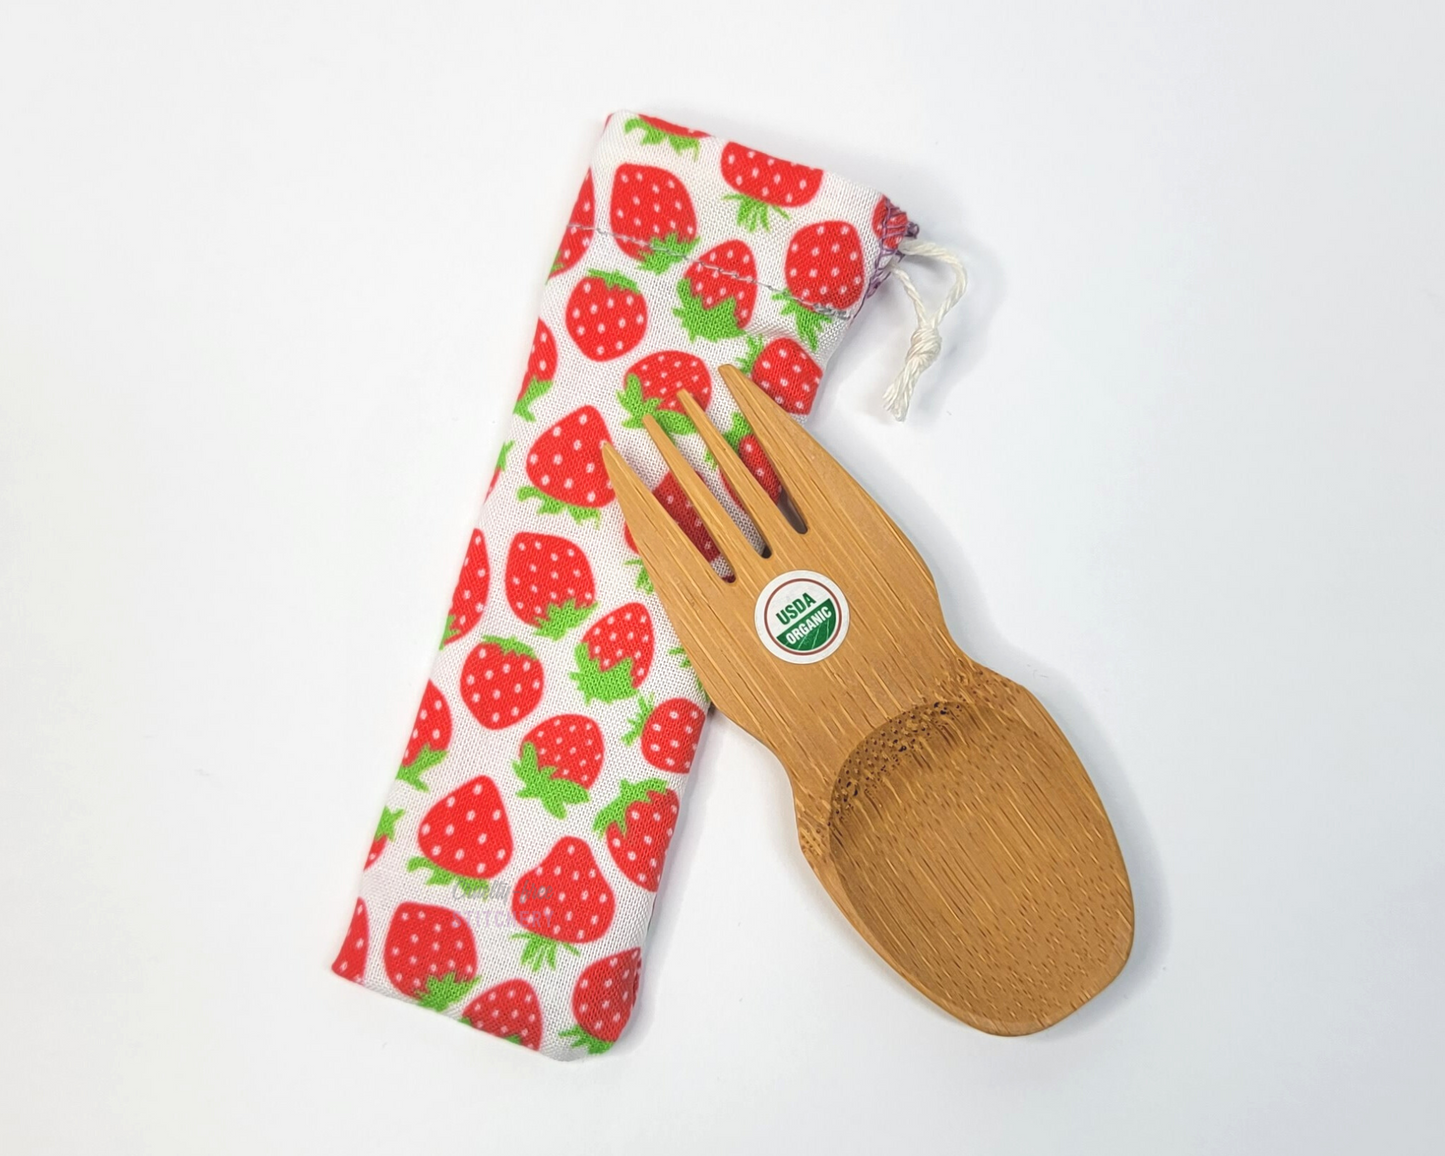 Reusable bamboo spork with pouch. The pouch is a white background with tiny red strawberries. The pouch is sitting diagonally with the spork partially on top pointing the other way. The spork is small, a double ended fork and spoon.